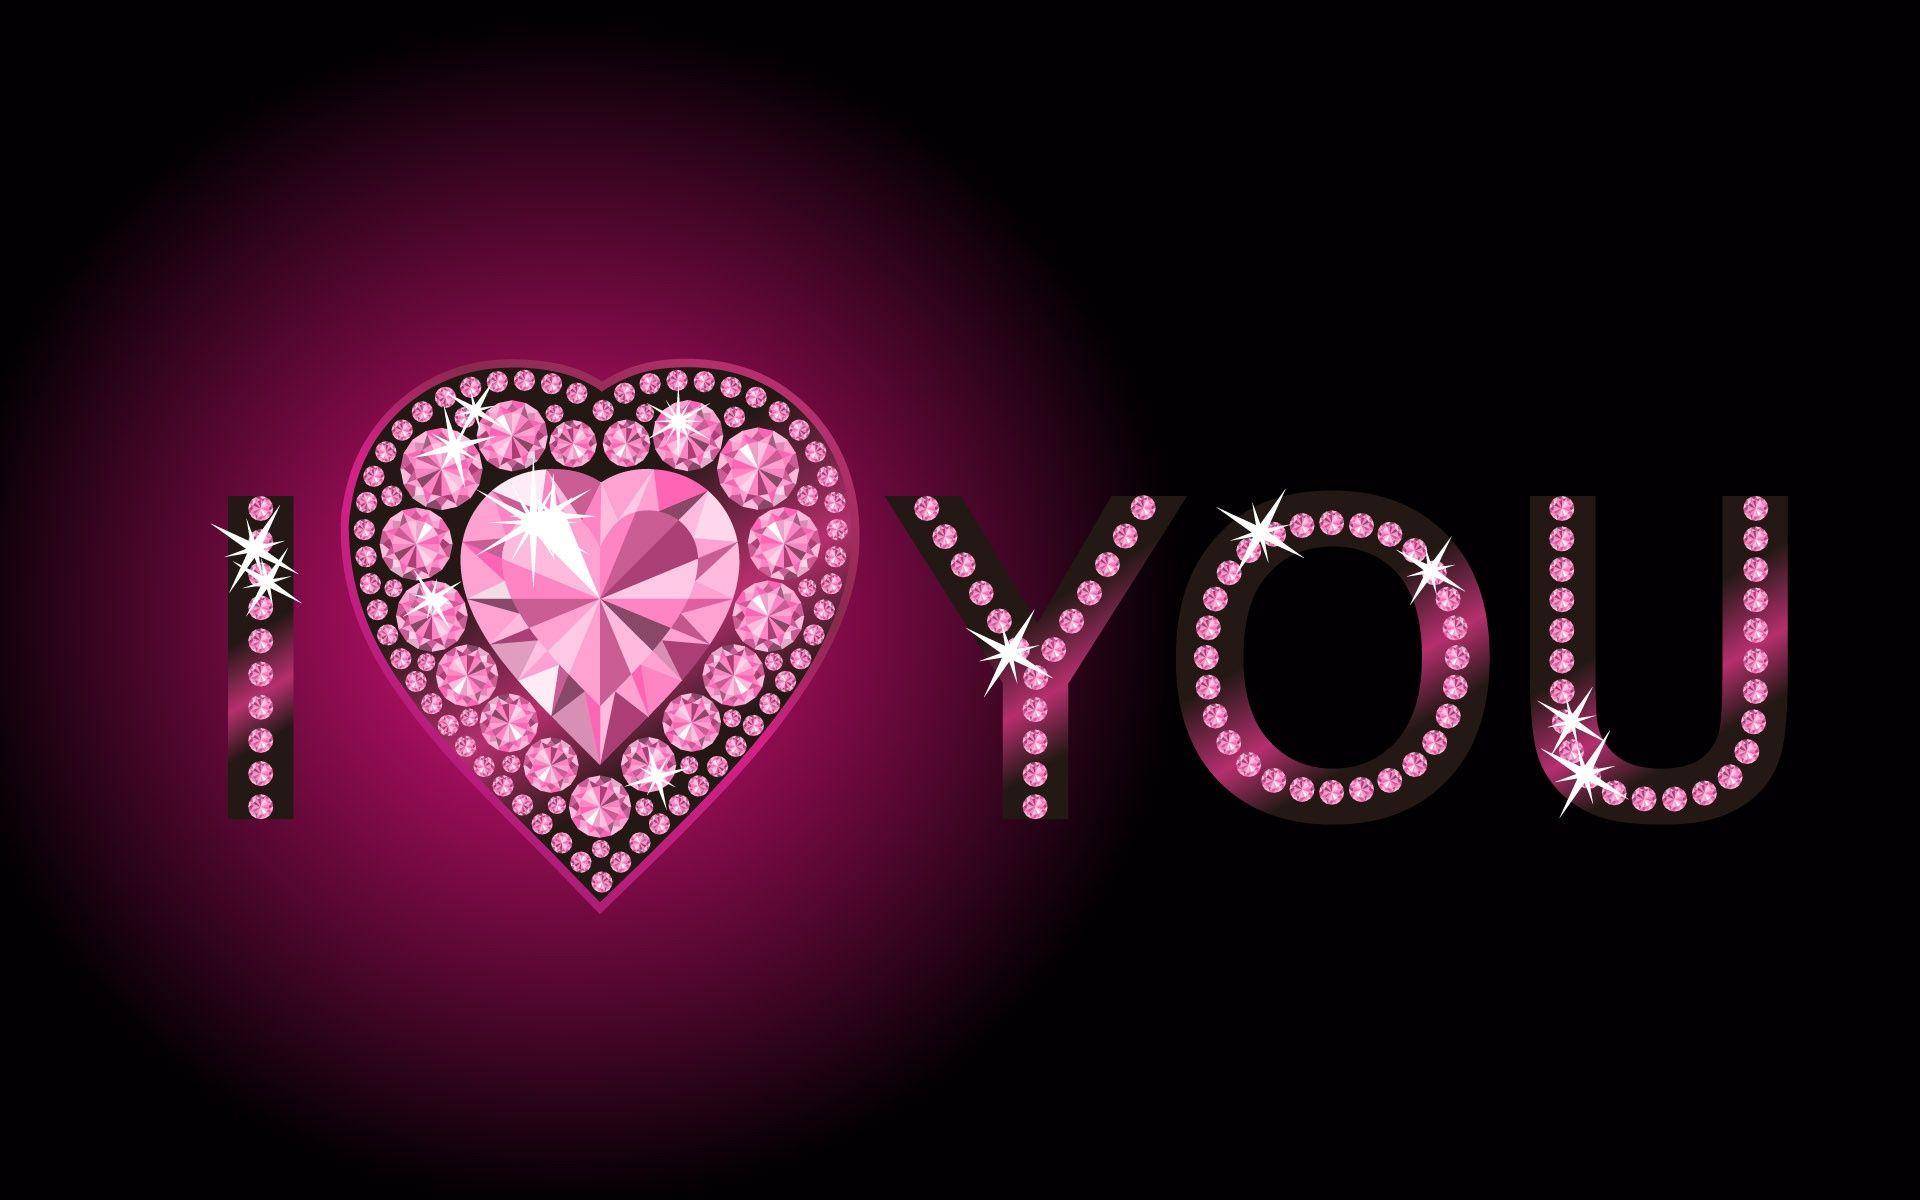 I Love You 4 Wallpaper in jpg format for free download